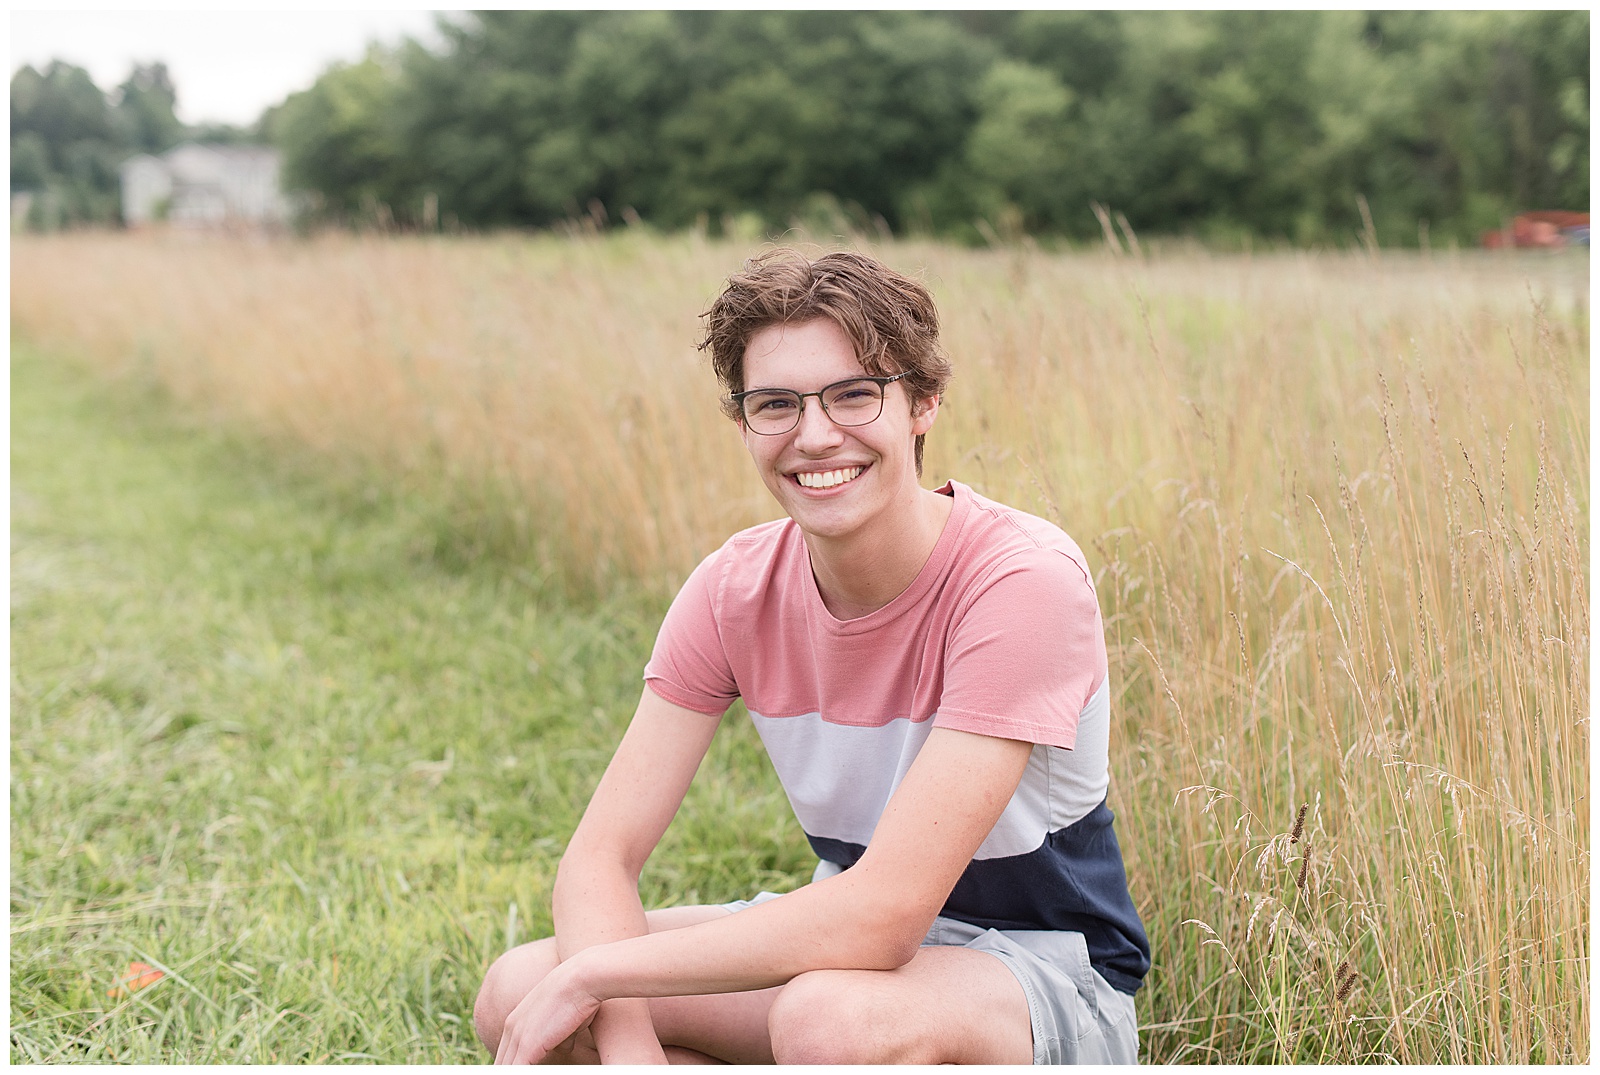 senior guy spokesmodel crouching down next to grassy field smiling wearing striped shirt and shorts